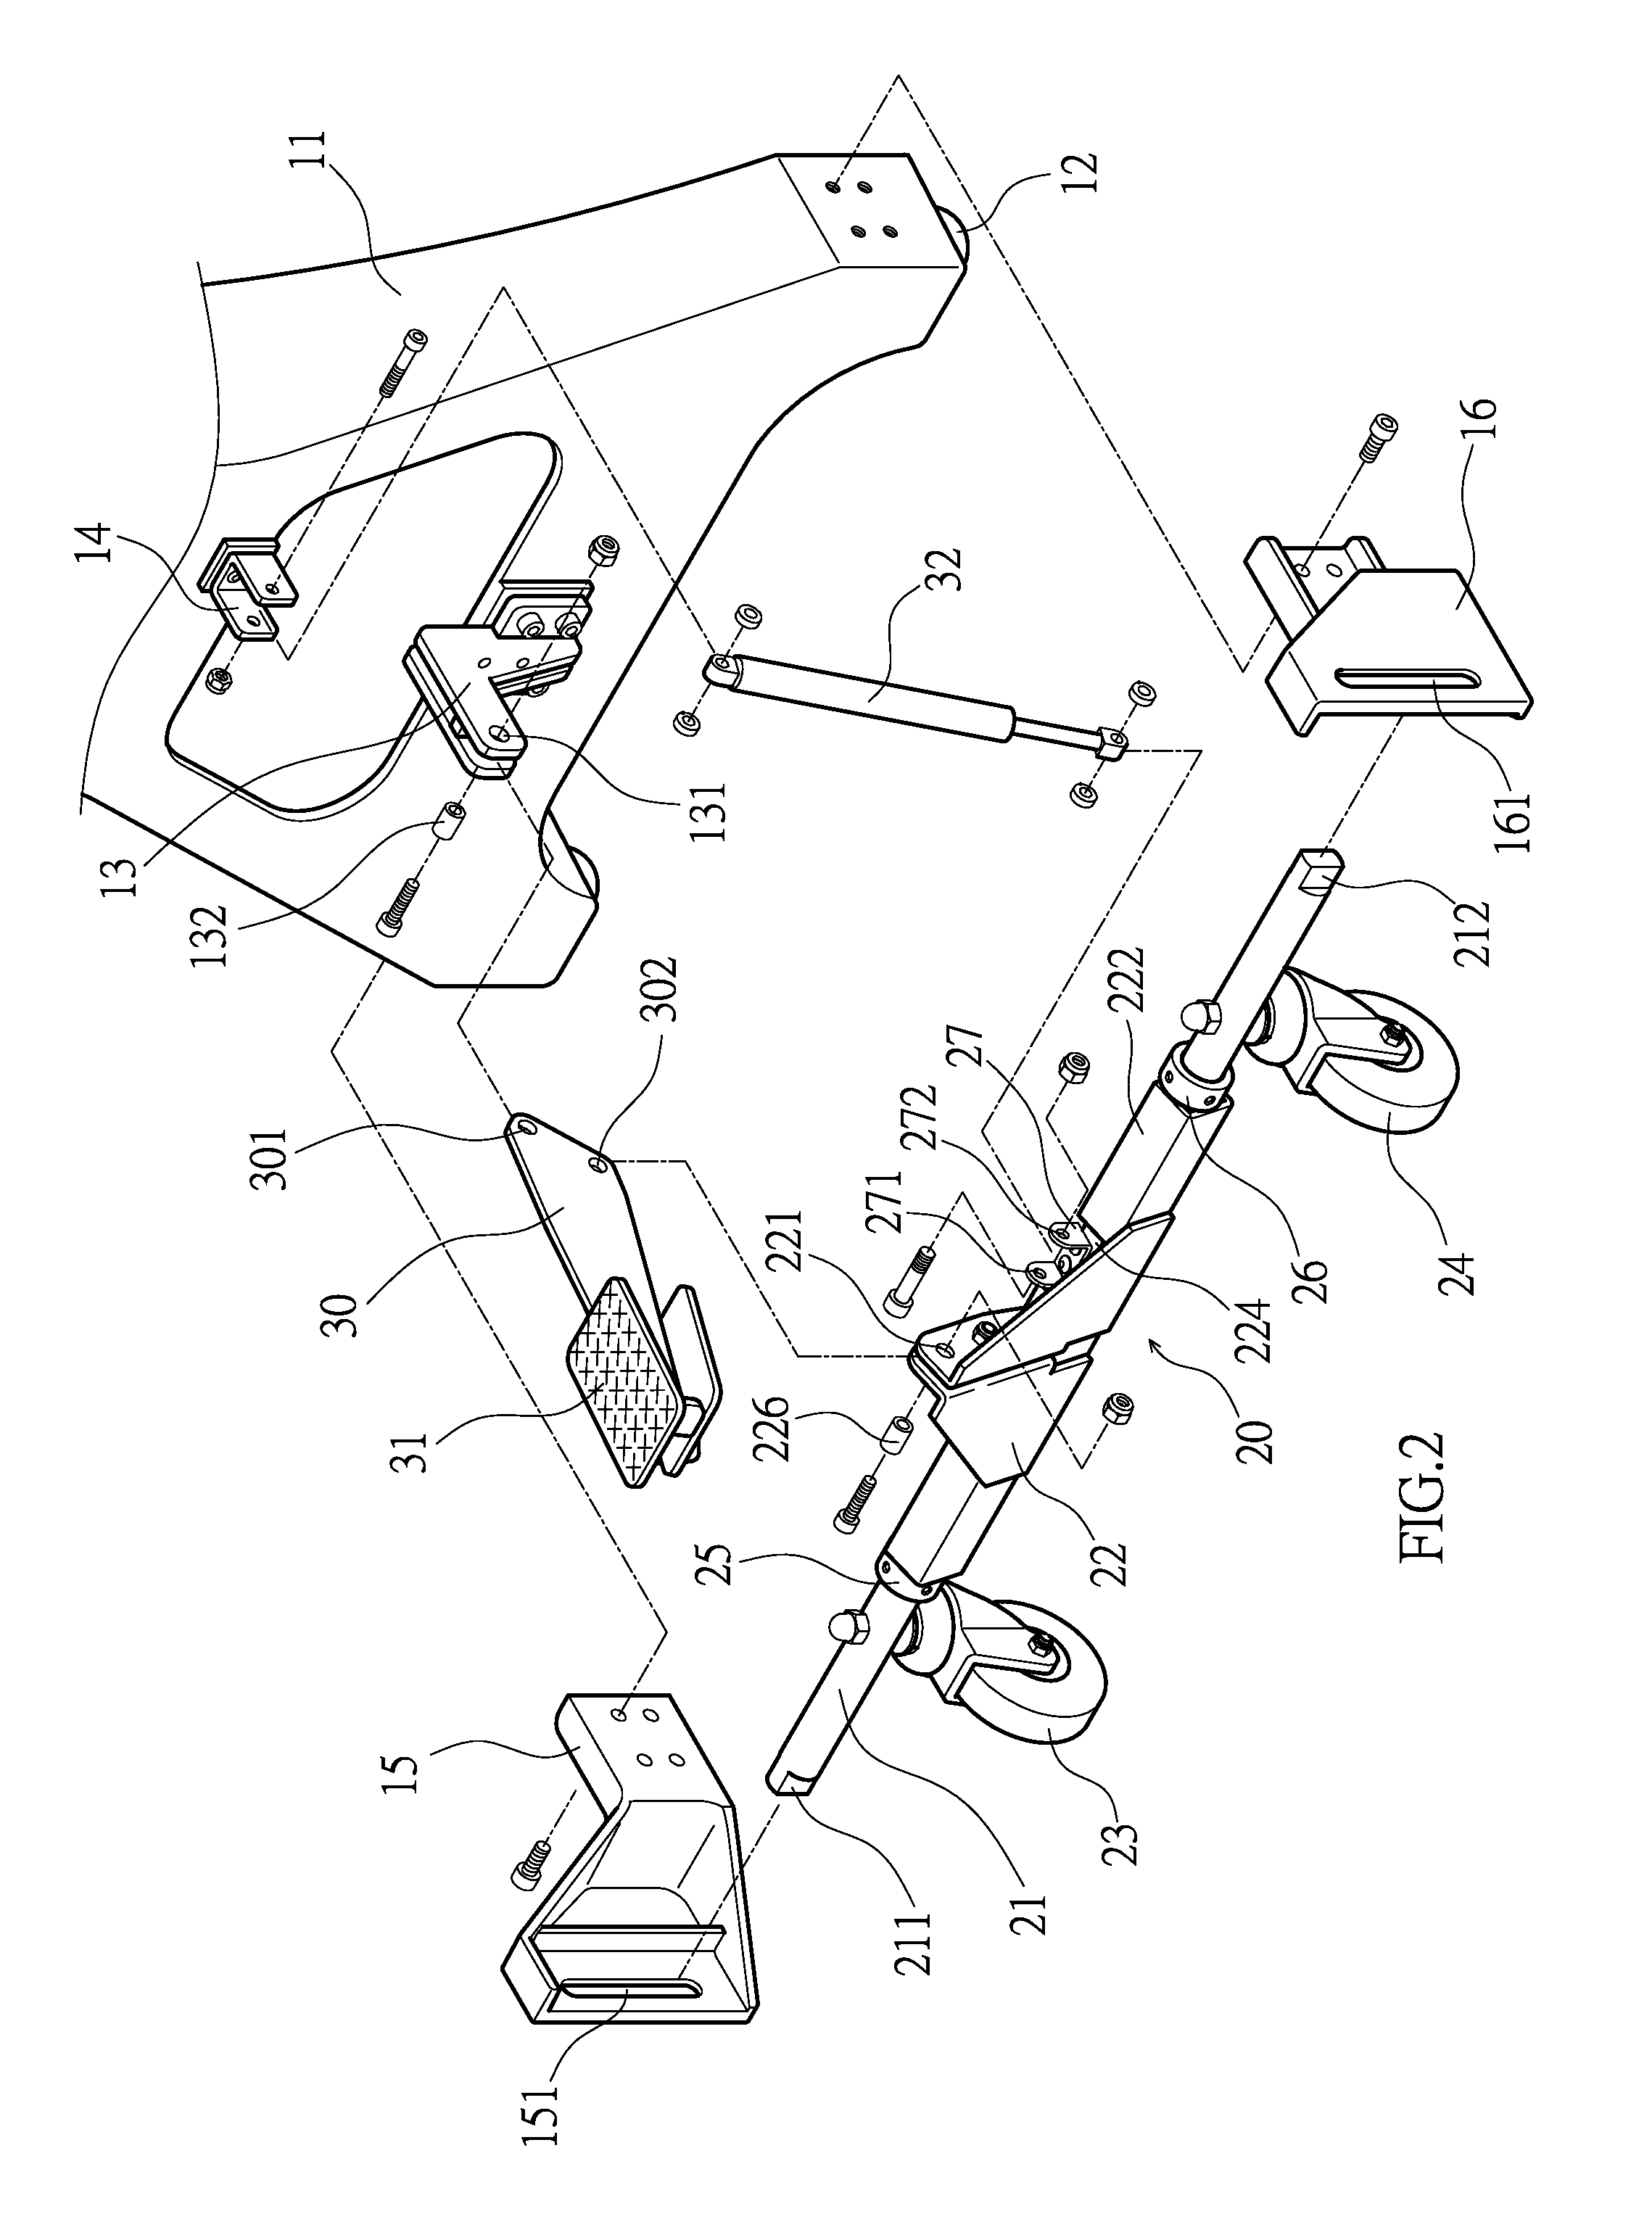 Movement Auxiliary Device for Machine Stand